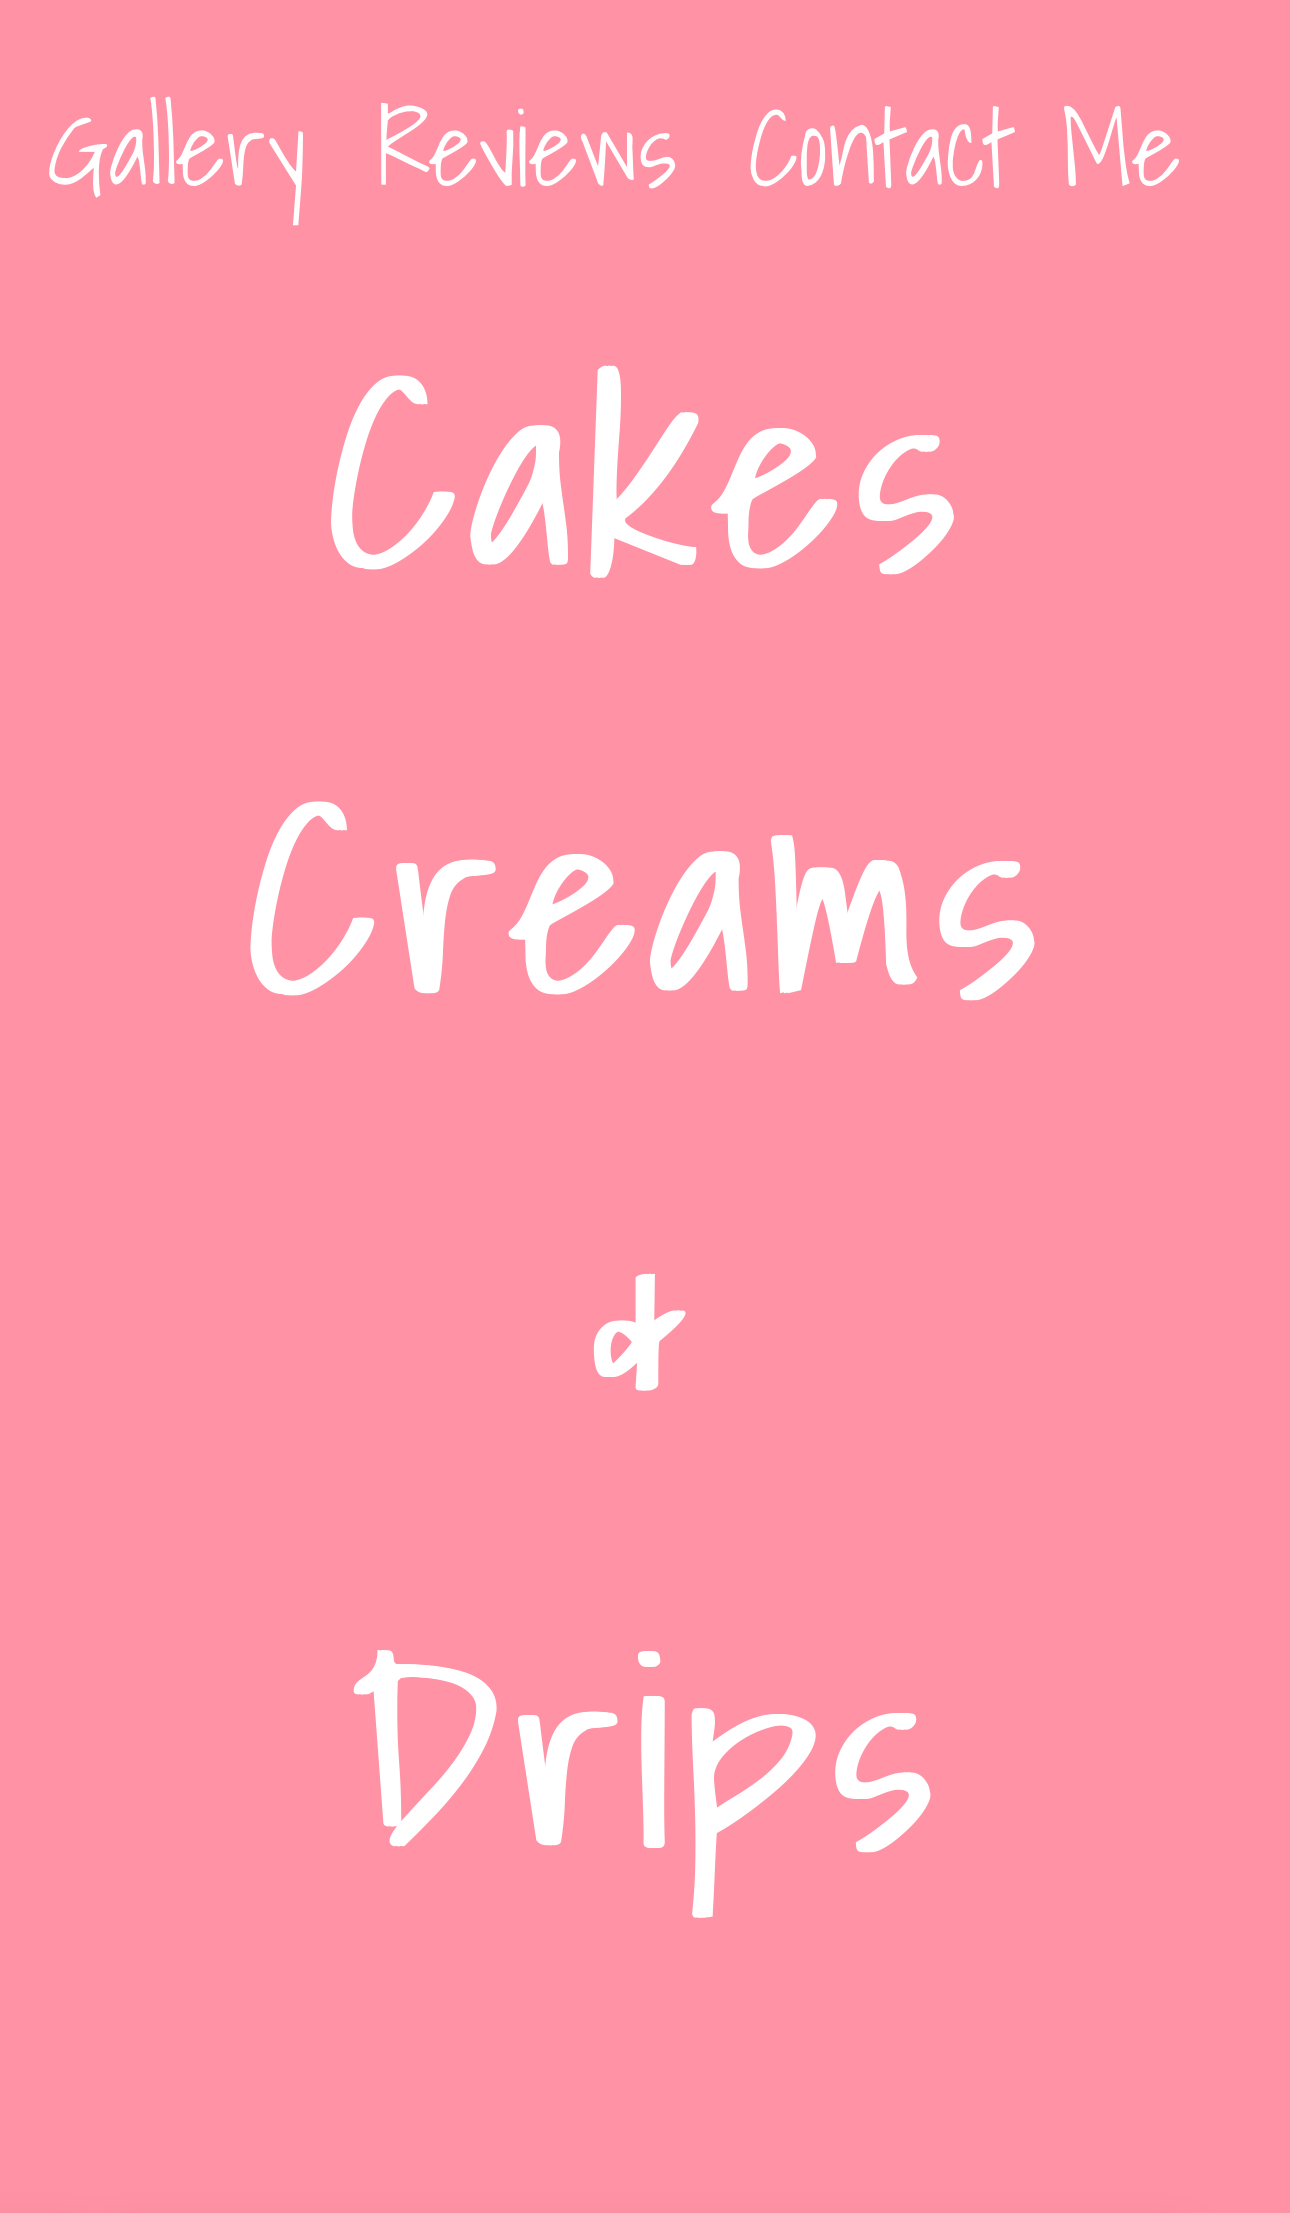 Cakes Creams & Drips Landing Page